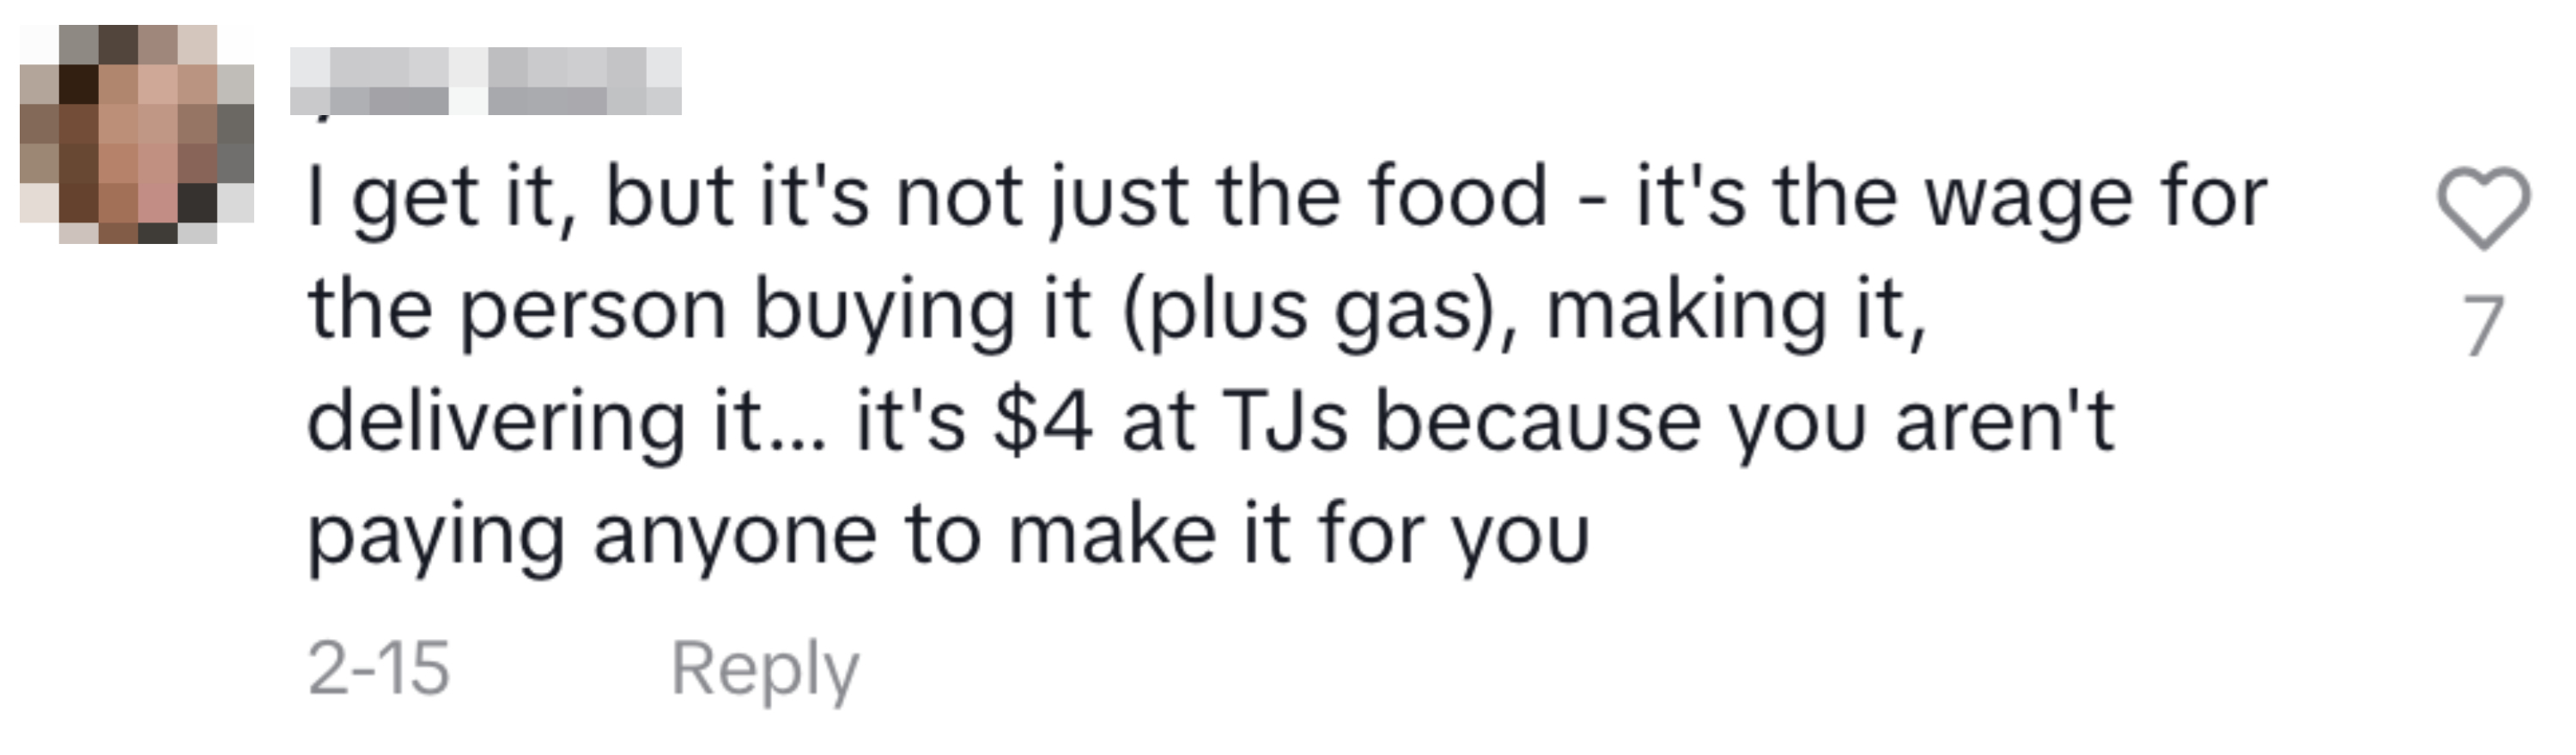 Comment on food pricing, mentioning wider costs like wages for person buying and making/delivering it, plus gas: &quot;it&#x27;s $4 at TJs because you aren&#x27;t paying anyone to make it for you&quot;